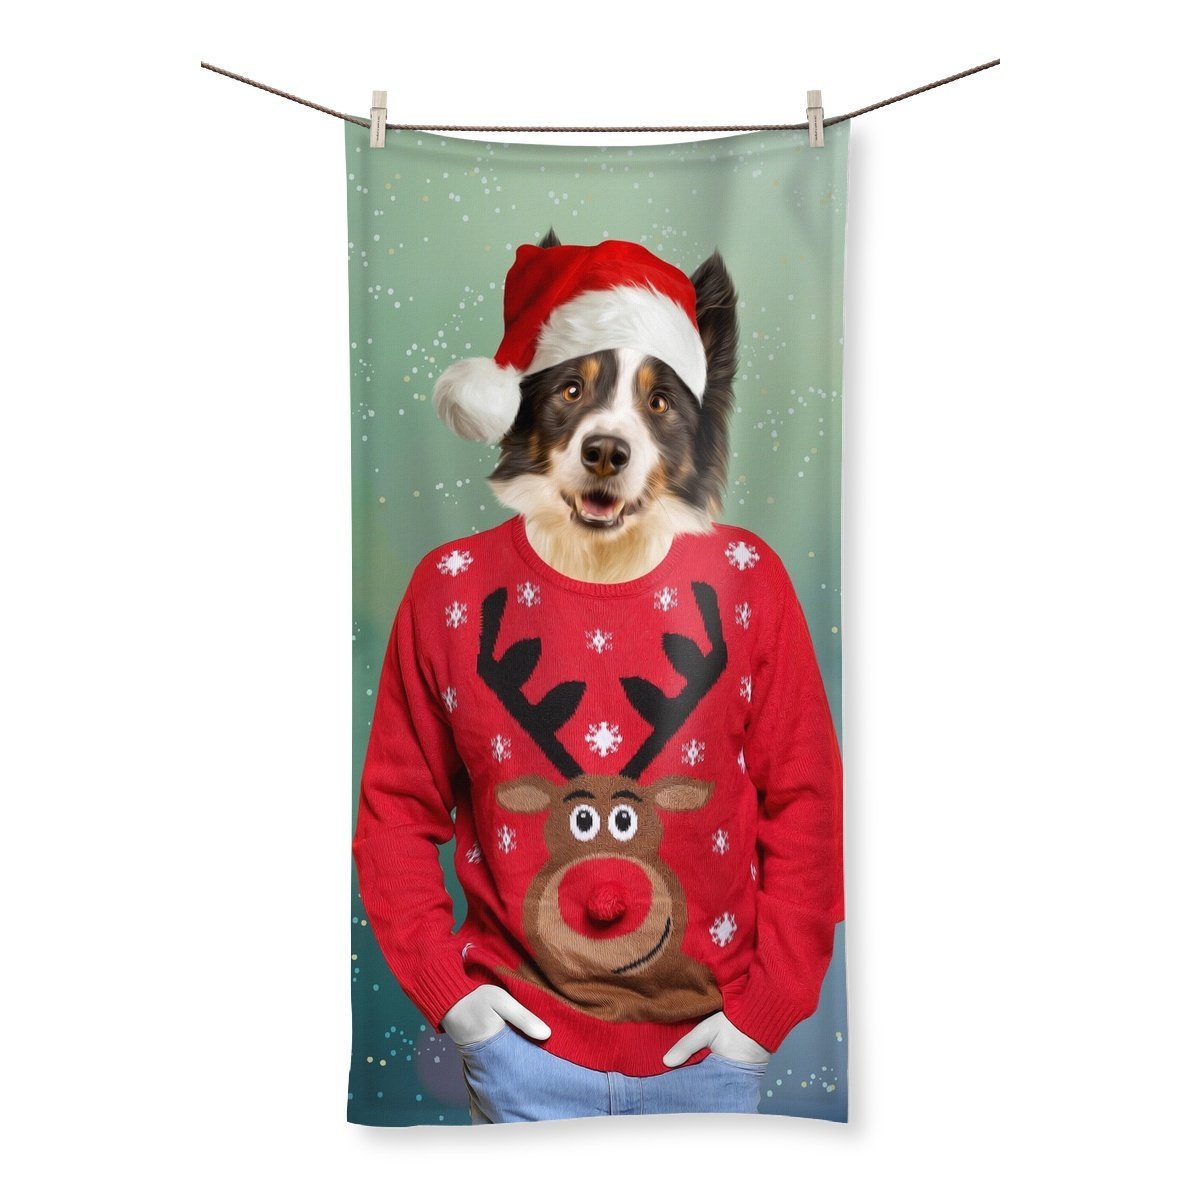 Christmas Jumper Dude: Custom Pet Towel - Paw & Glory - #pet portraits# - #dog portraits# - #pet portraits uk#Paw & Glory, paw and glory, pet portraits in oils, personalized pet and owner canvas, hogwarts dog houses, my pet painting, painting pets, aristocrat dog painting, pet portrait,pet art Towel,